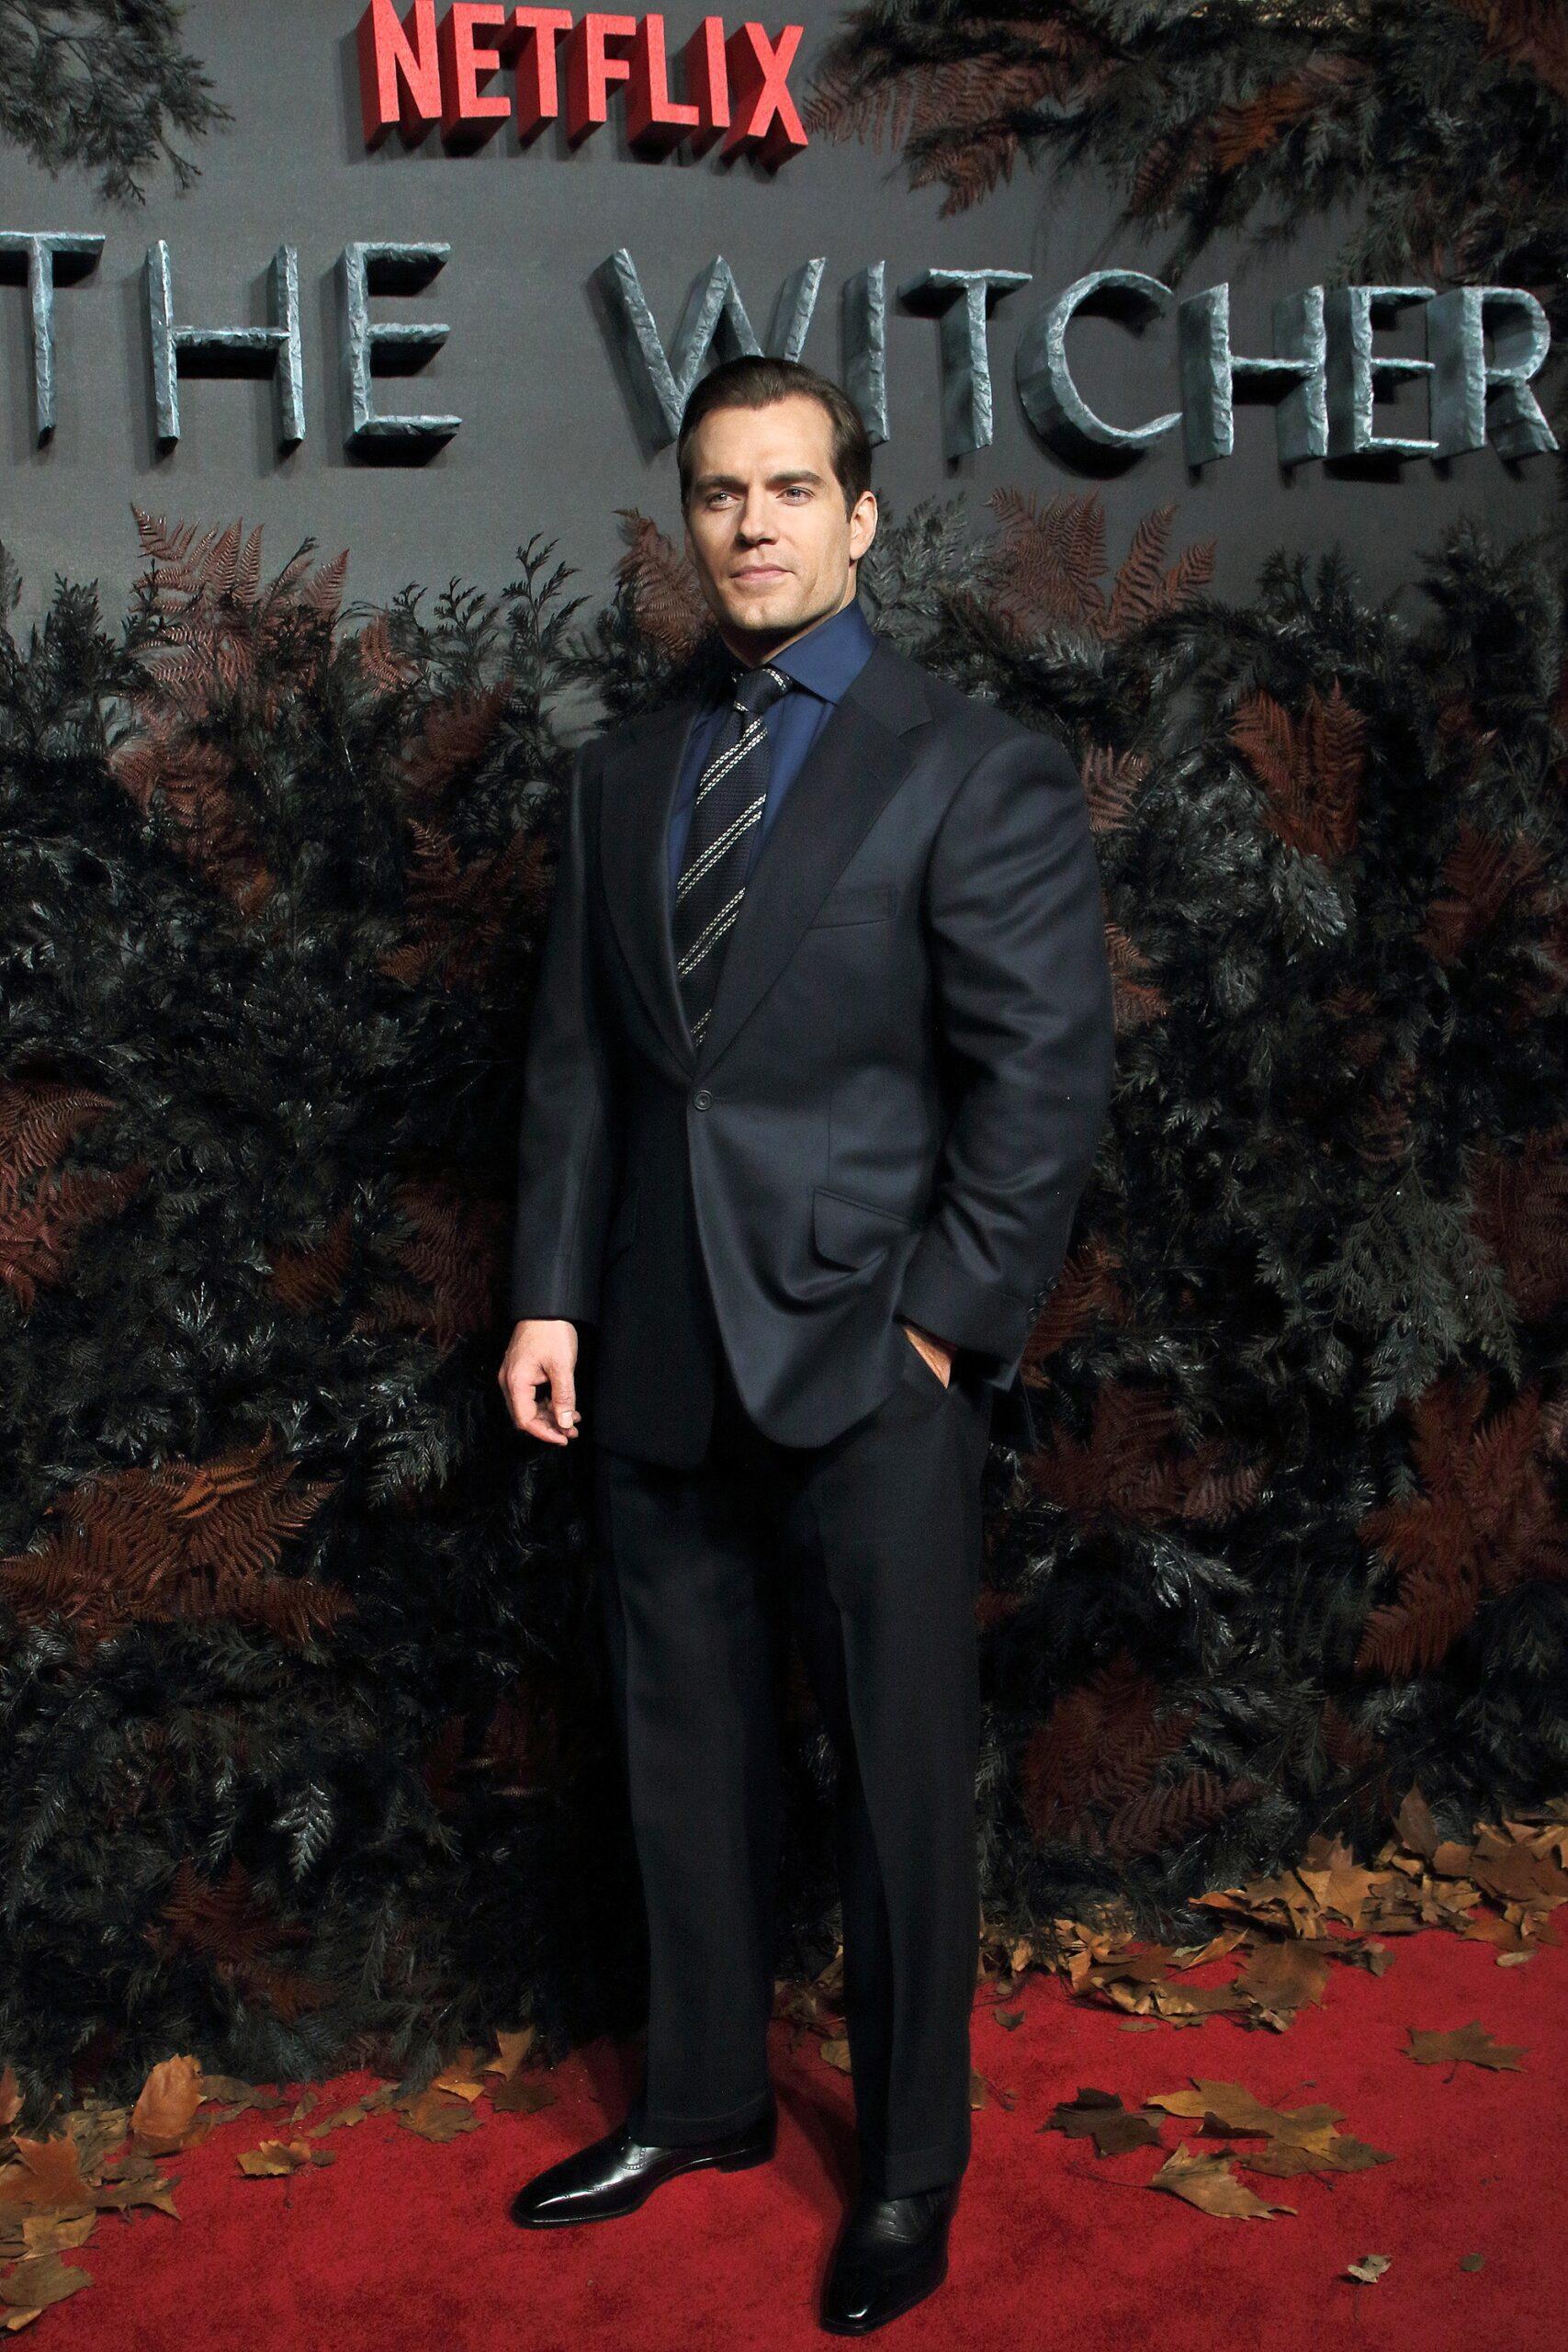 A photo showing Henry Cavill at the World Premiere of Netflix's The Witcher in London, UK.